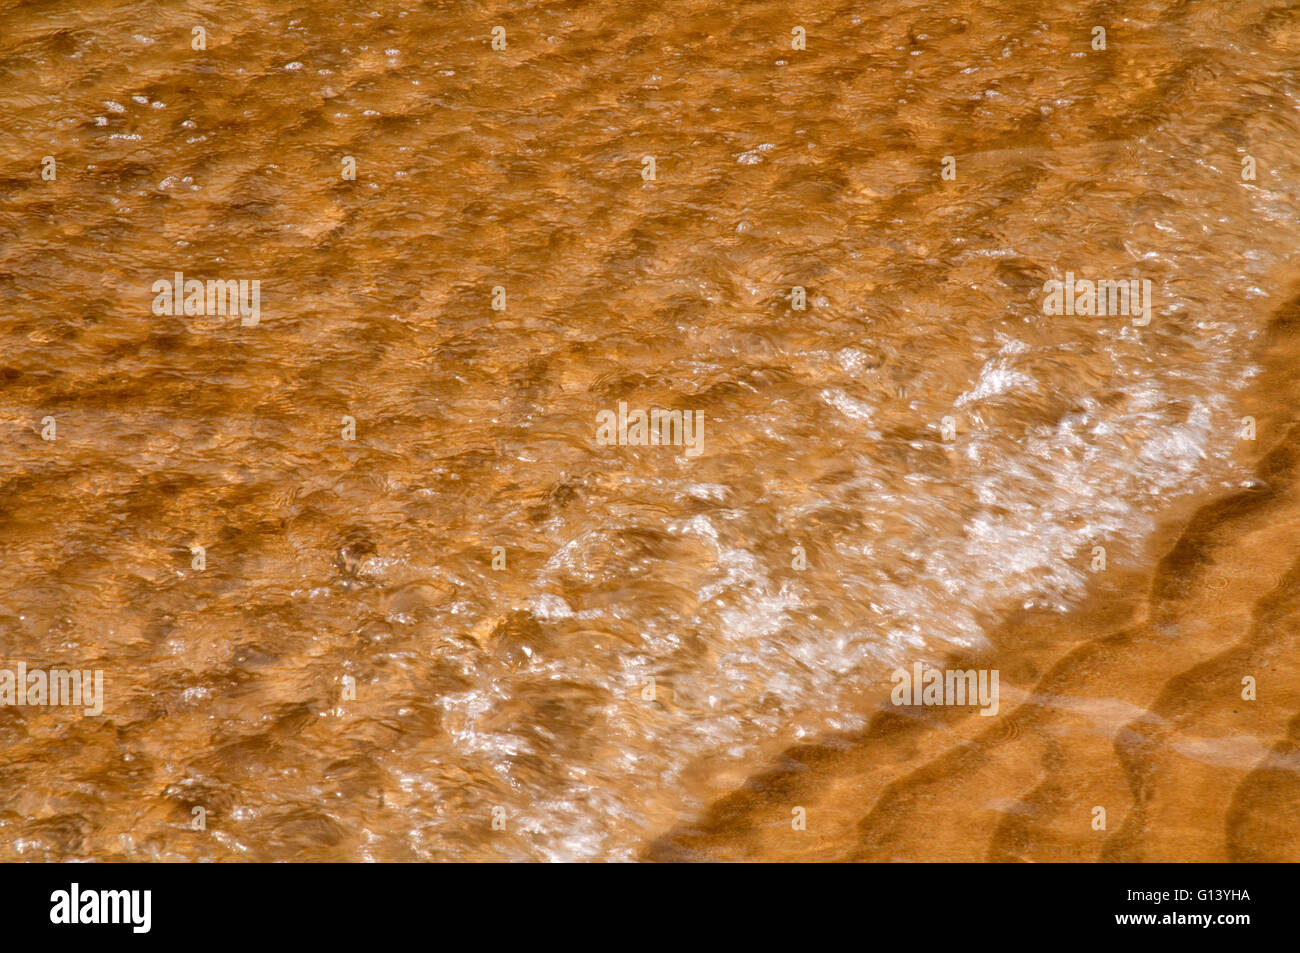 Waves on sand viewed through the water. Stock Photo